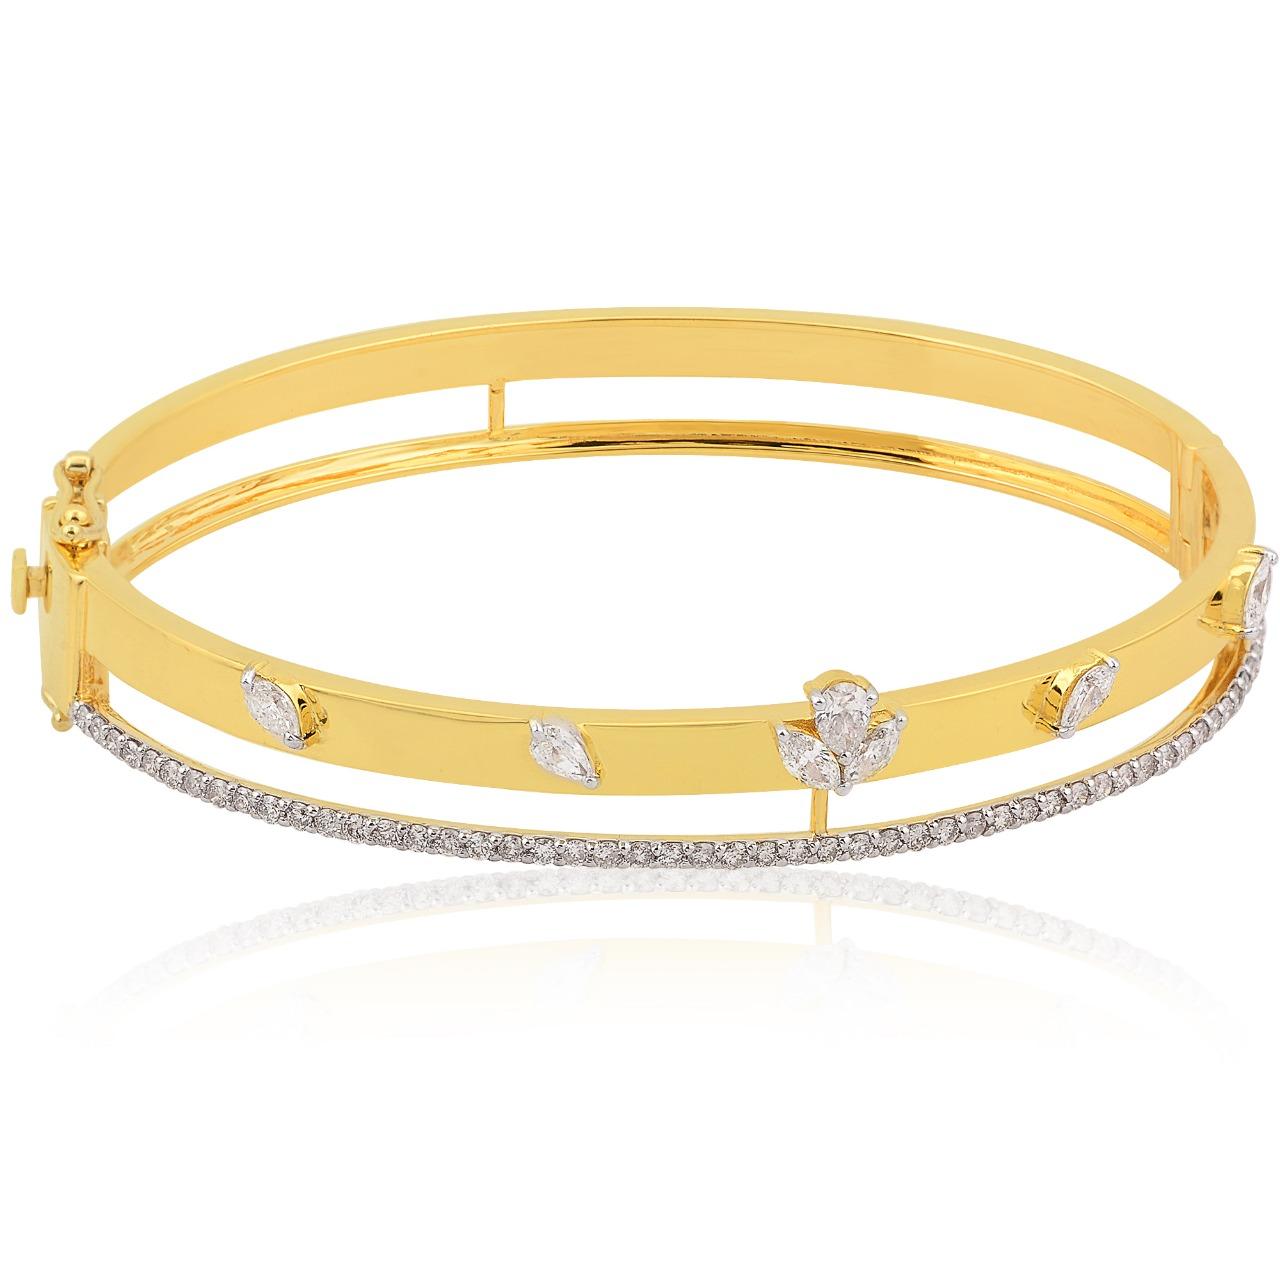 A beautiful bracelet handmade in 14K gold & set in 1.30 carats of sparkling diamonds. Available in rose, yellow and white gold.

FOLLOW MEGHNA JEWELS storefront to view the latest collection & exclusive pieces. Meghna Jewels is proudly rated as a